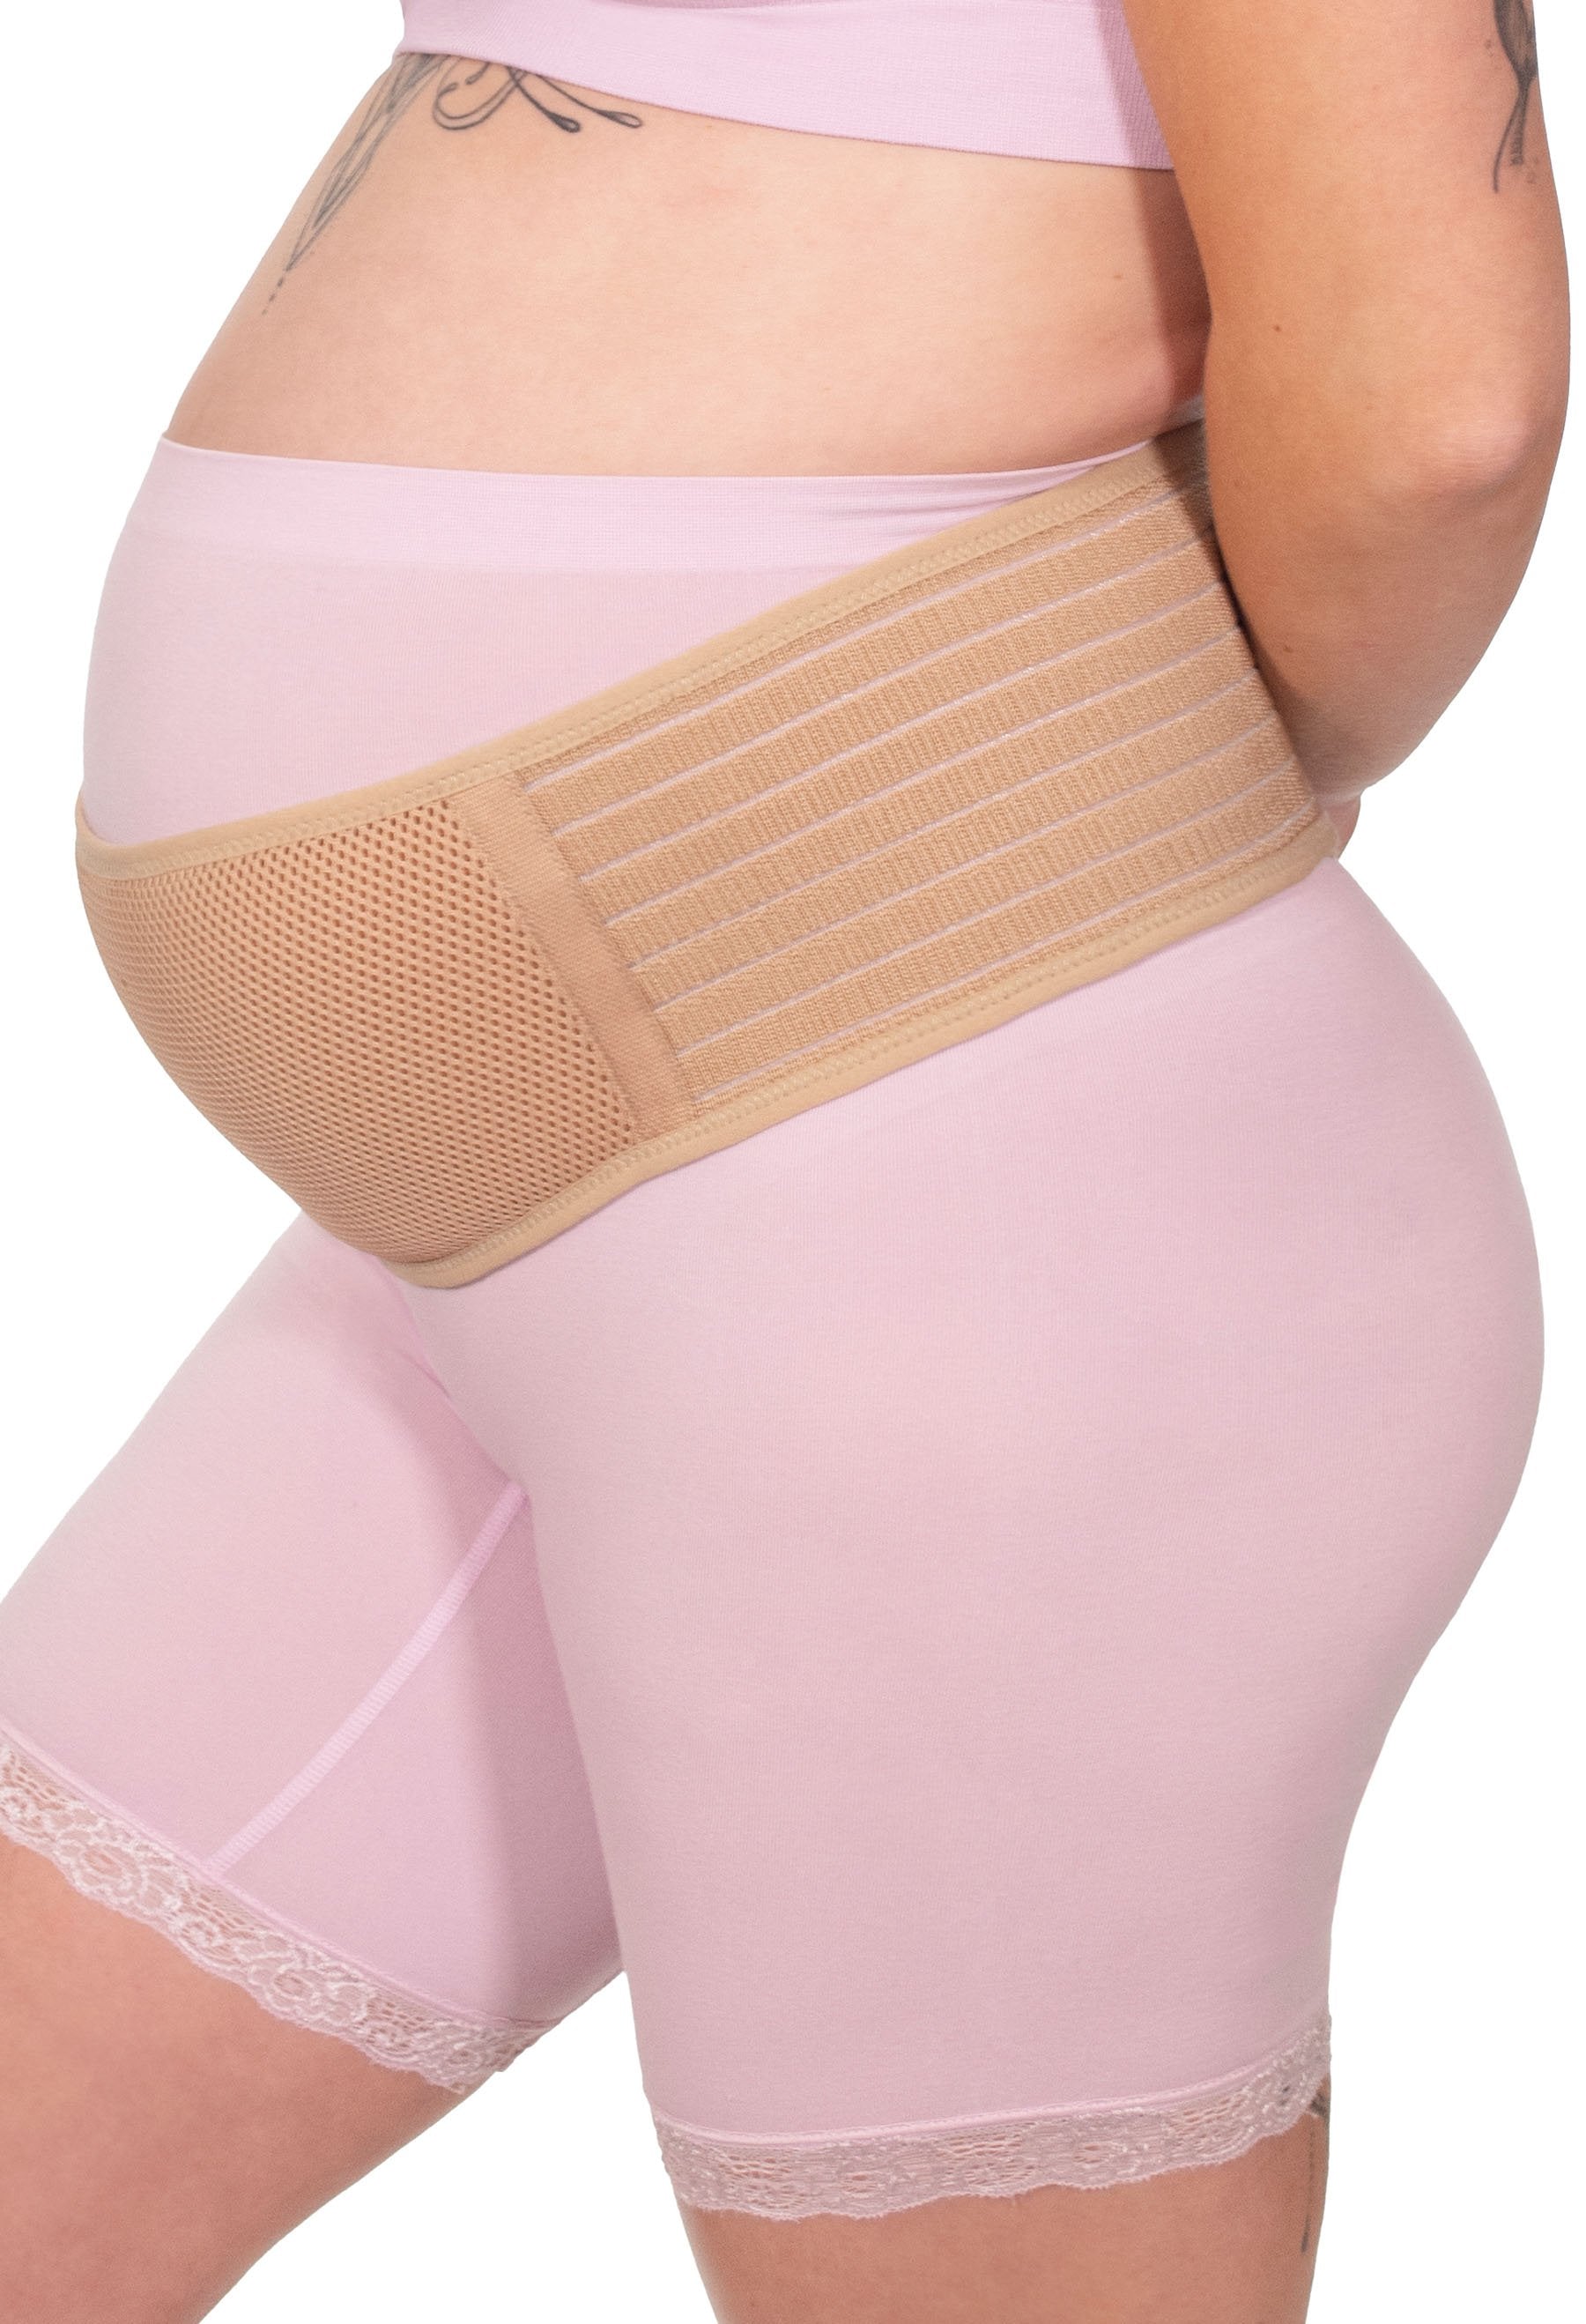 Mom-EZ Maternity Support, 52% OFF